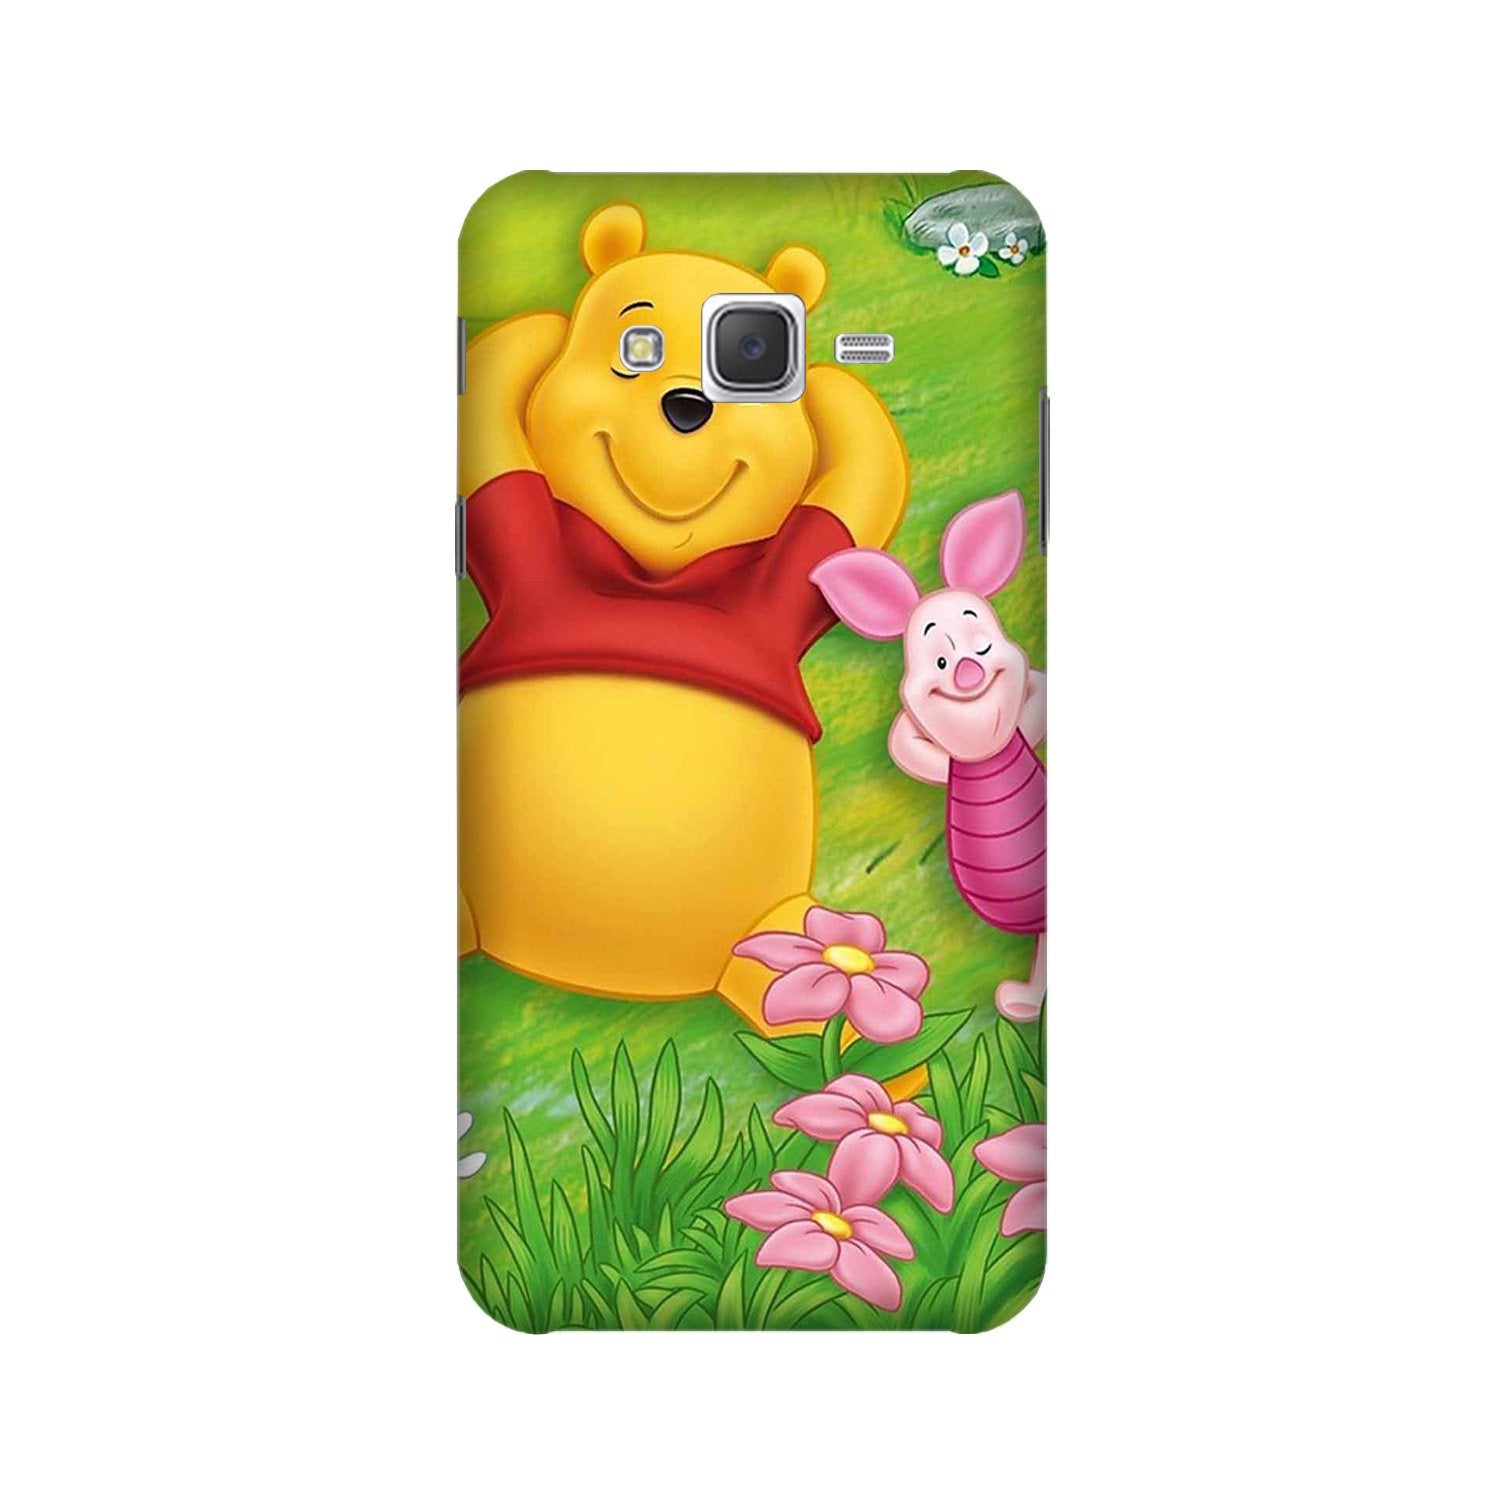 Winnie The Pooh Mobile Back Case for Galaxy J3 (2015)  (Design - 348)